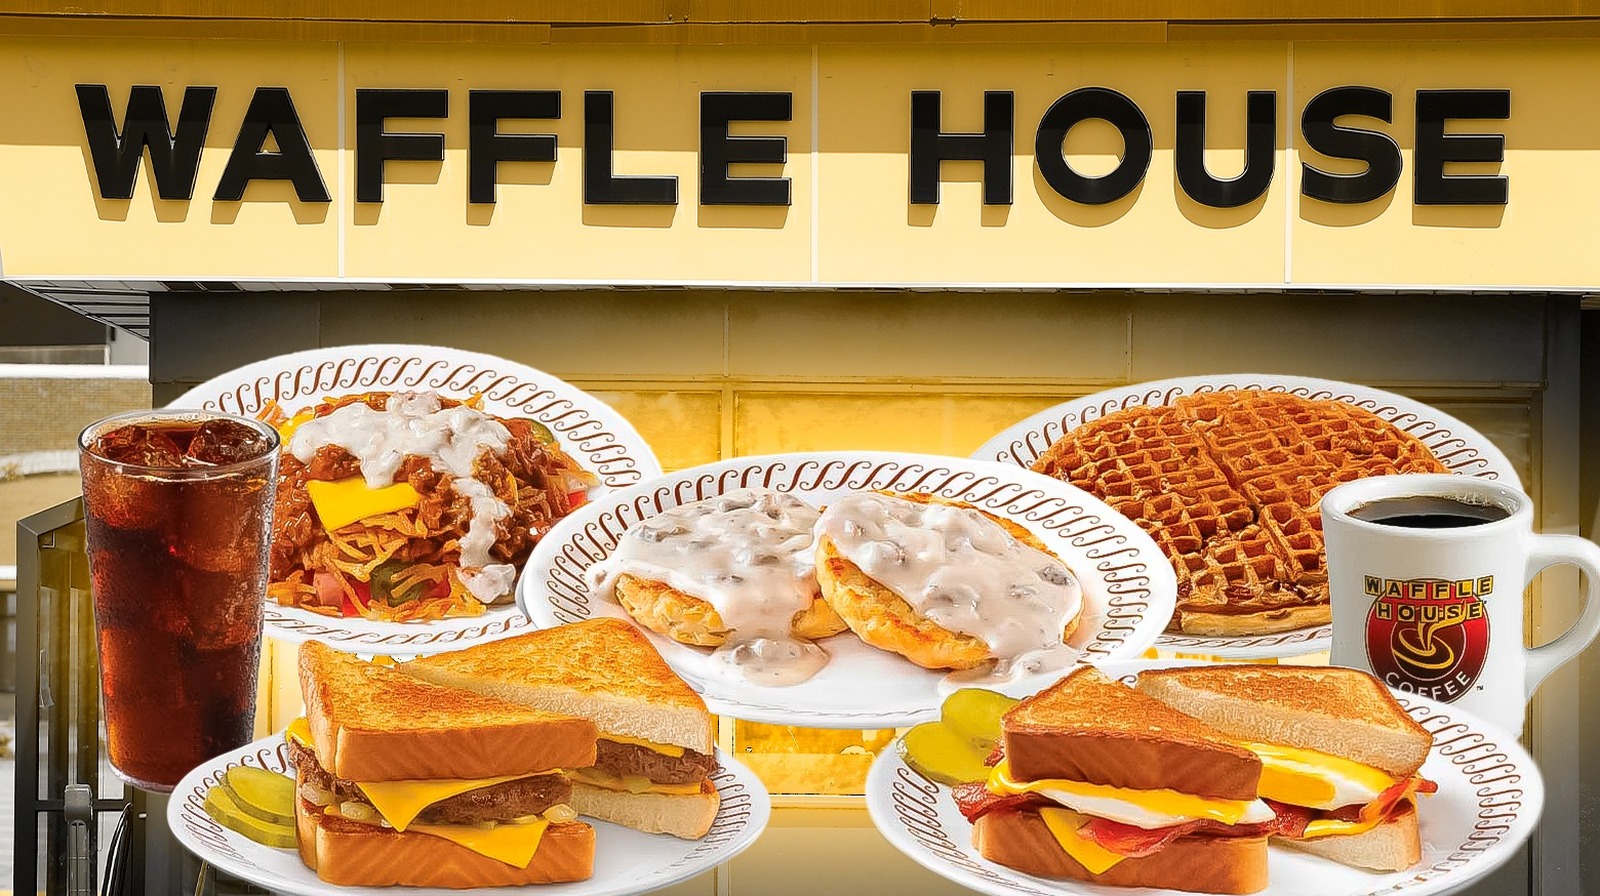 https://www.thedailymeal.com/img/gallery/the-best-things-to-order-your-first-time-at-waffle-house/l-intro-1683207930.jpg